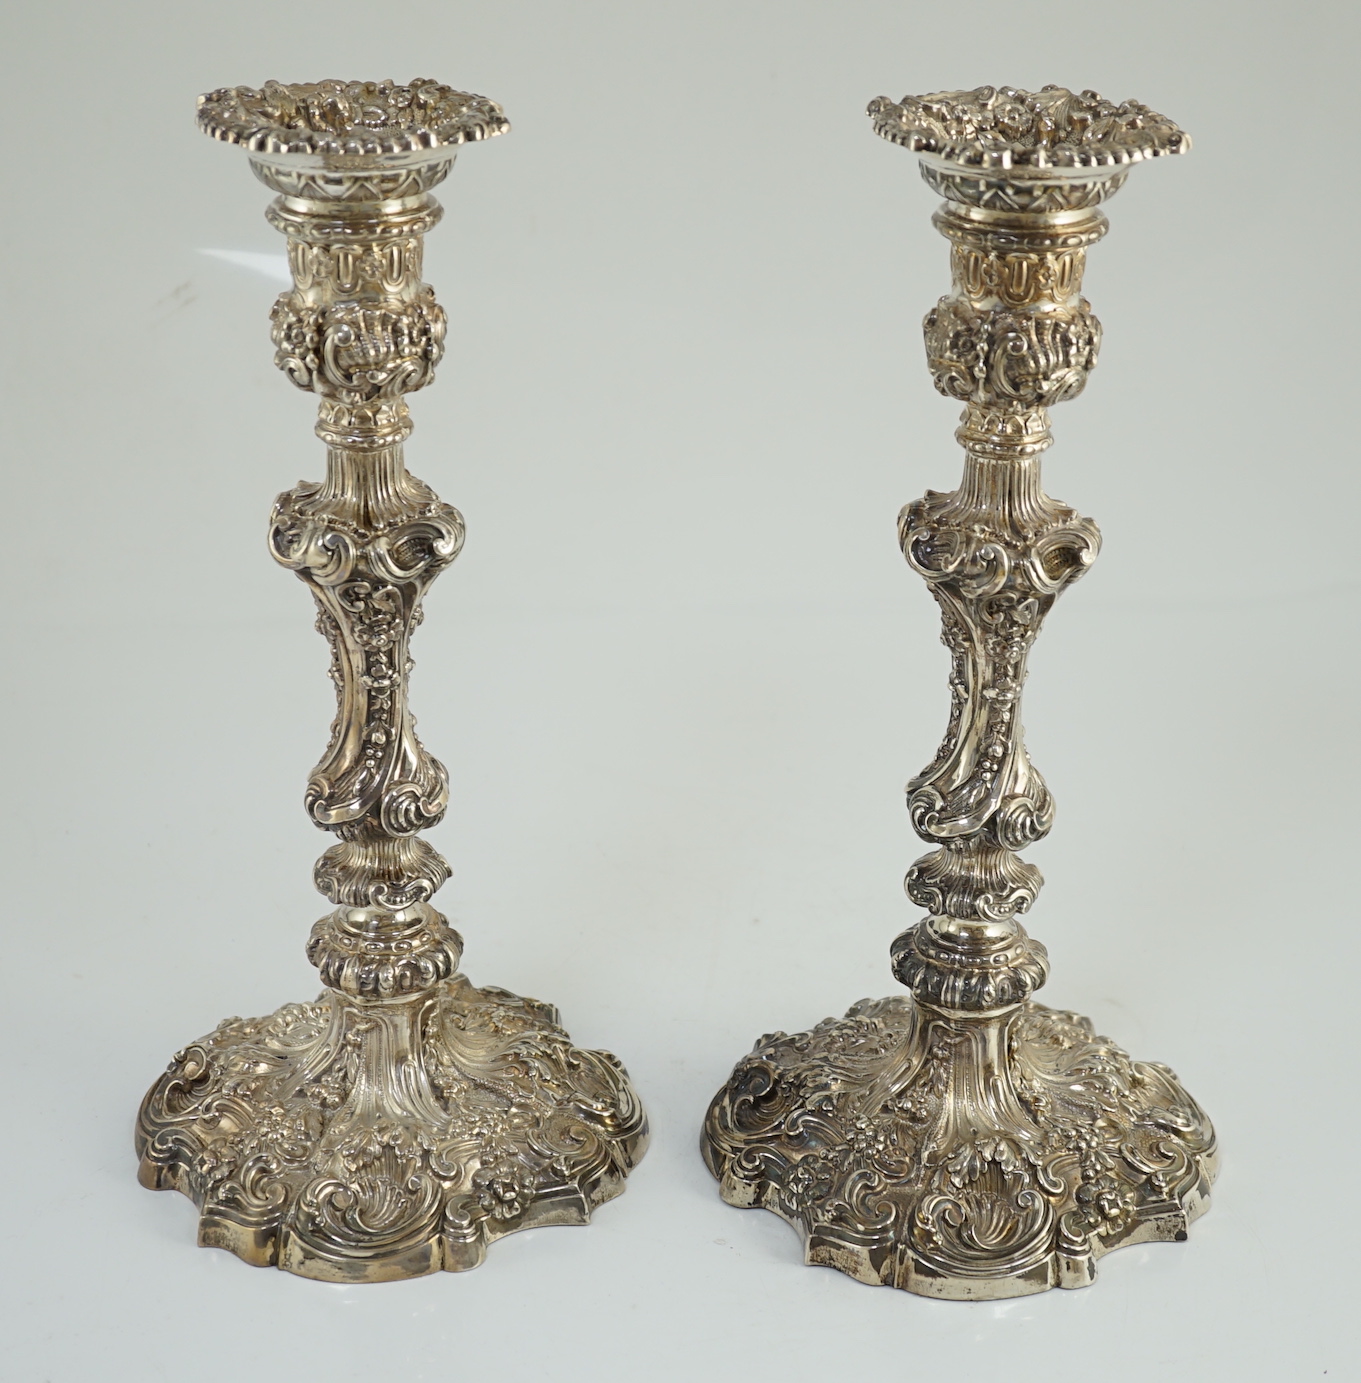 An ornate pair of Edwardian silver candlesticks, by Walker & Hall, with fixed sconces, waisted - Image 8 of 11